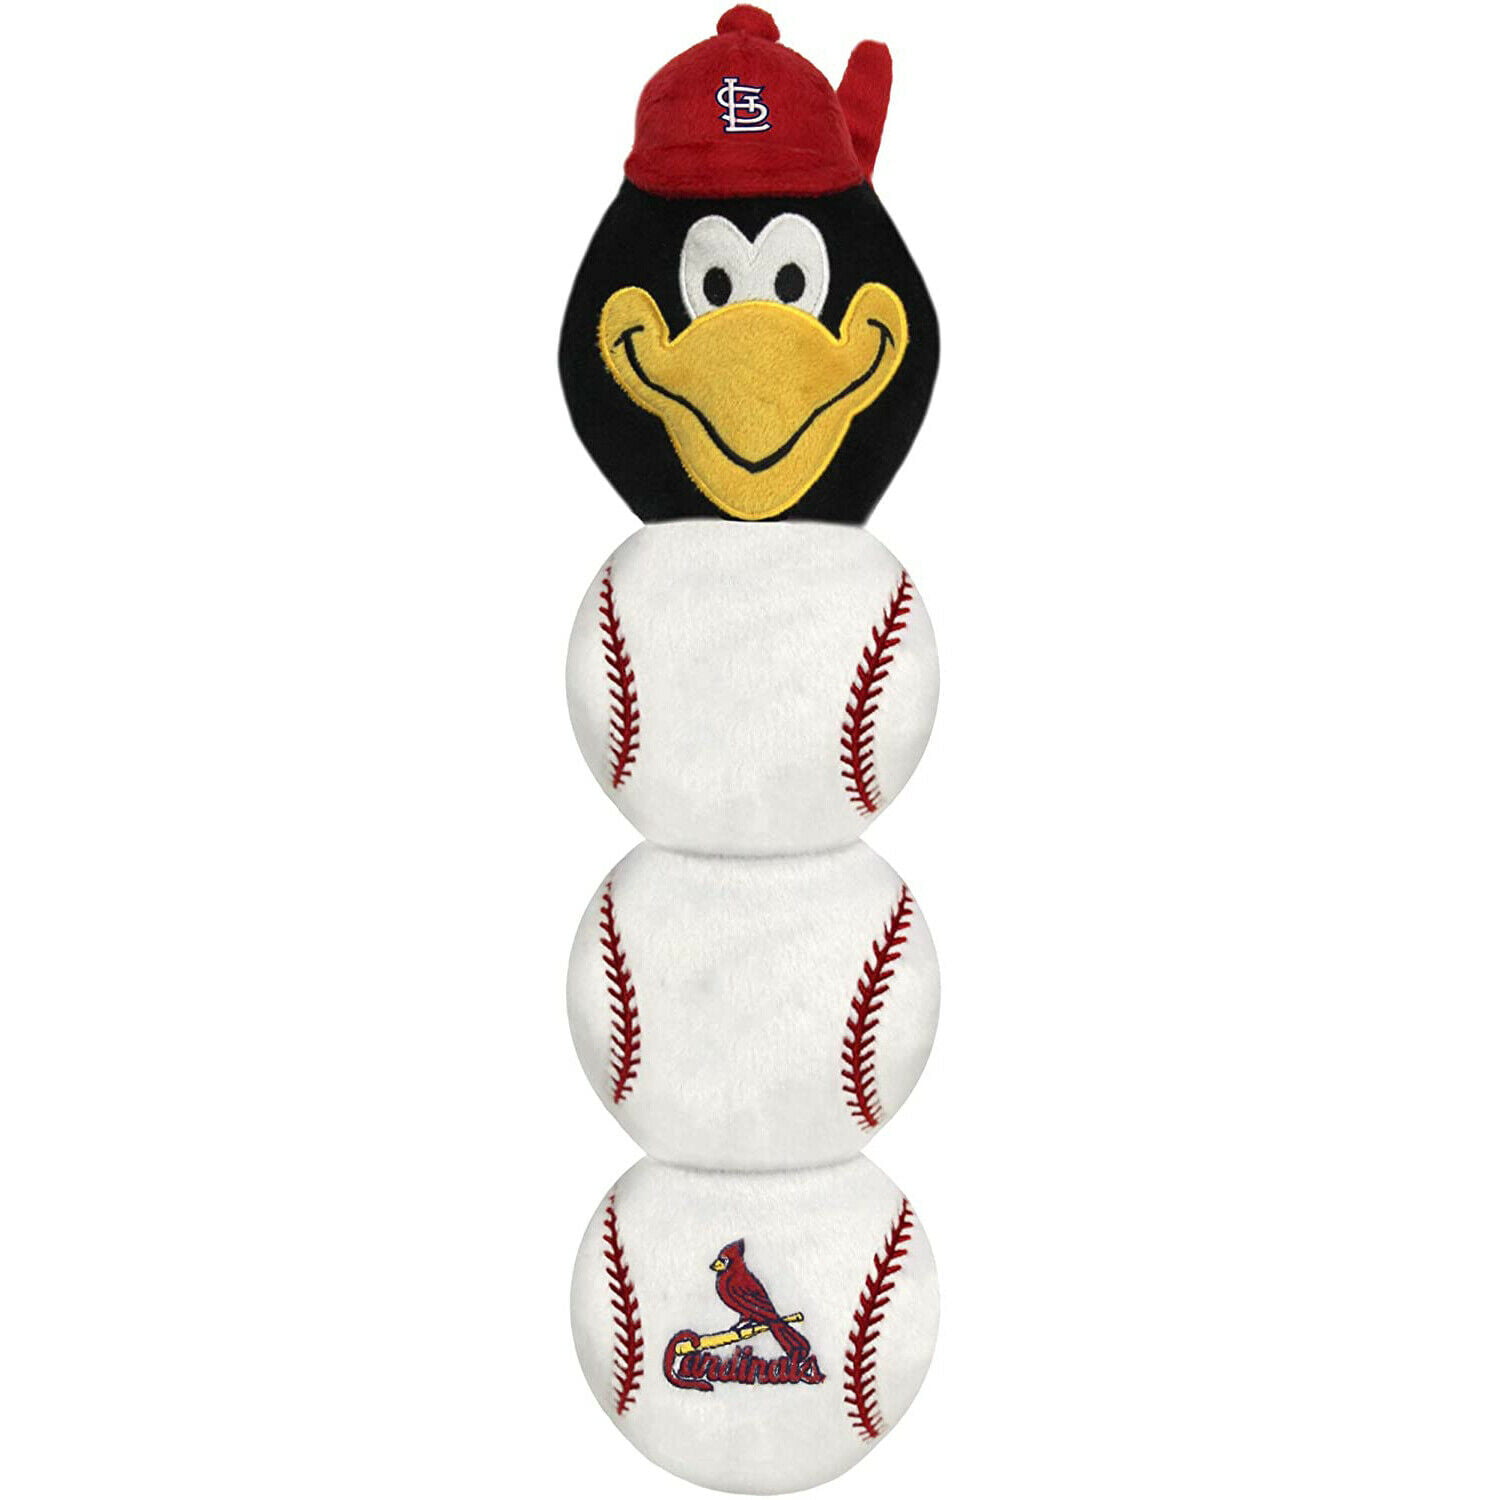 Pets First NCAA Louisville Cardinals - Cardinal Bird Mascot Toy for Pets.  Plush Dog Toy with 5 Inner SQUEAKERS. 21 Long Dog Toy, One Size, UL-3226